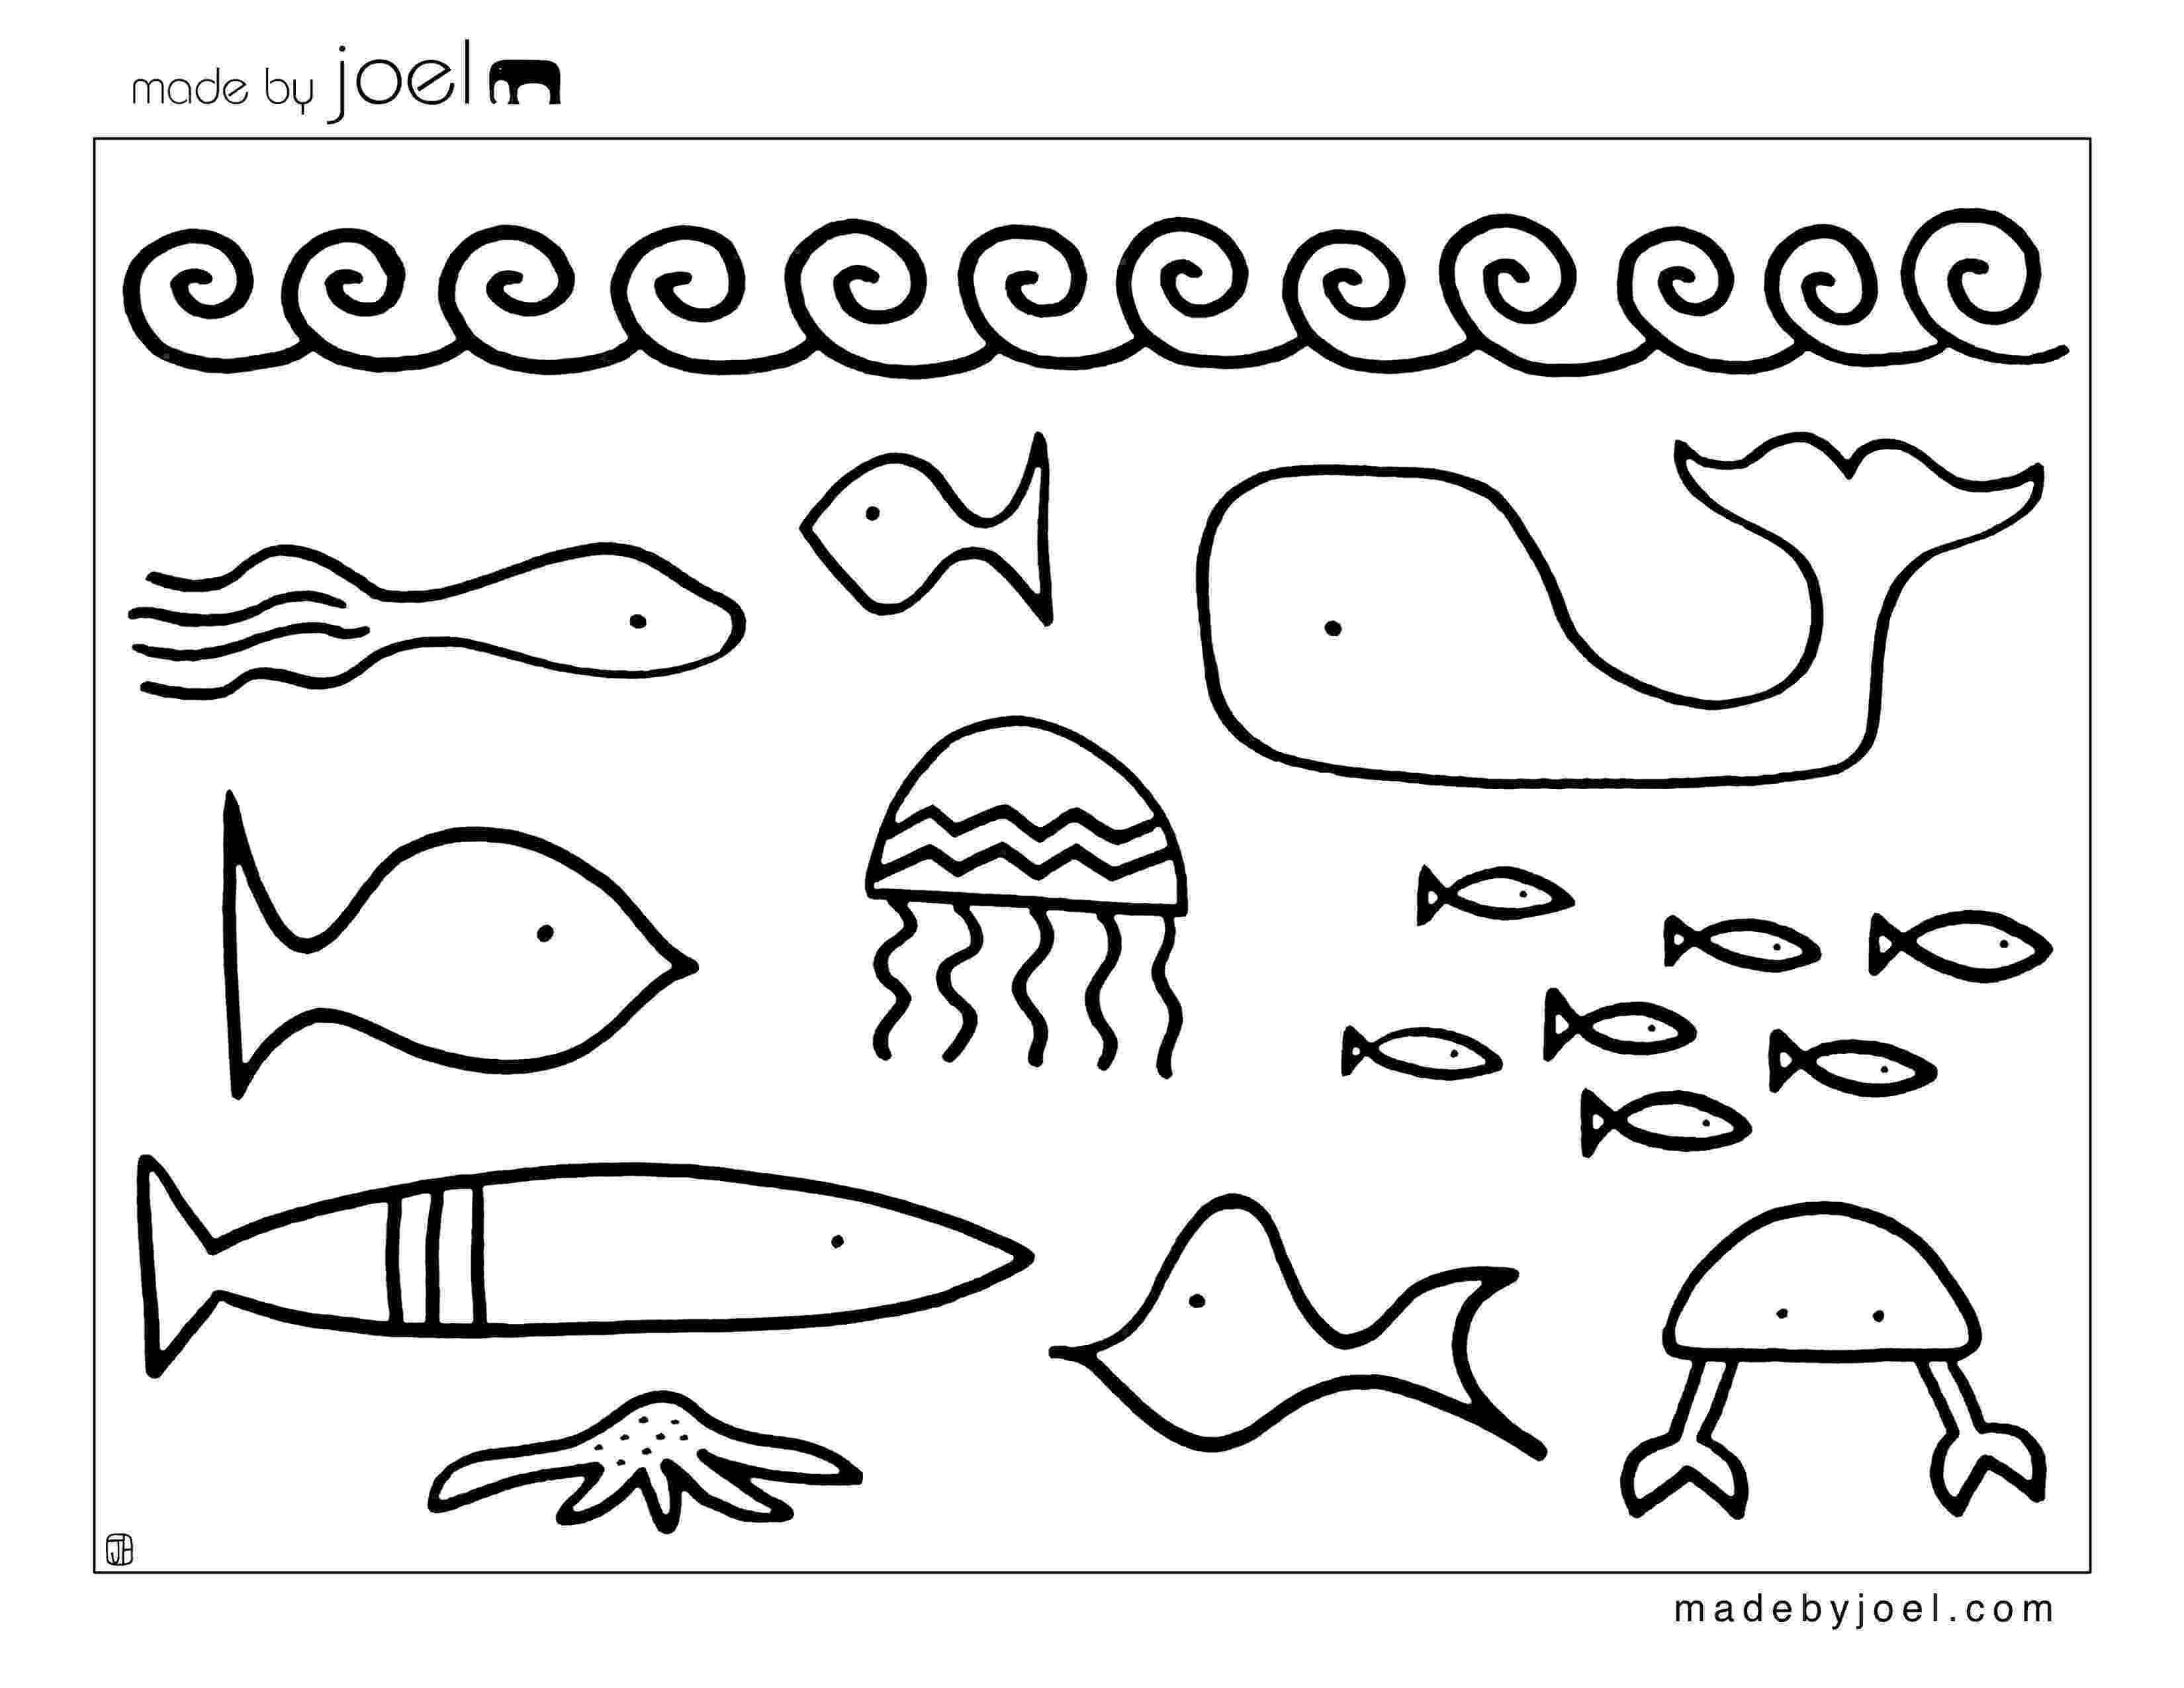 colouring pages for june june coloring pages to download and print for free june colouring pages for 